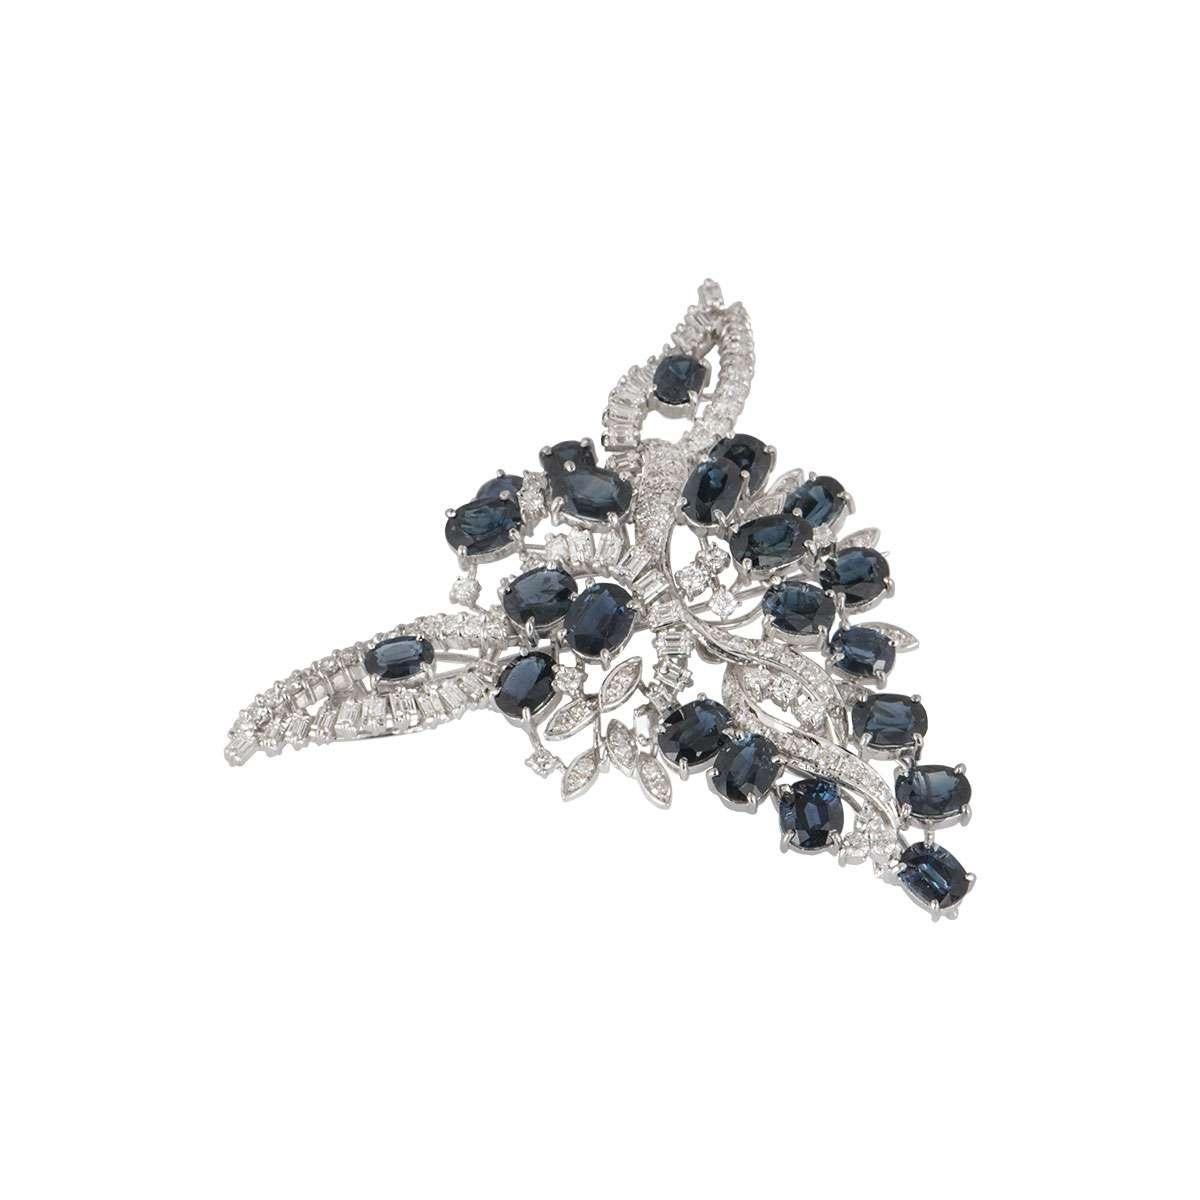 A stunning white gold sapphire and diamond brooch. The openwork brooch is set with 22 mixed oval and round cut sapphires totalling approximately 12.35ct, displaying a deep blue colour. Complementing the sapphires are baguette and round brilliant cut